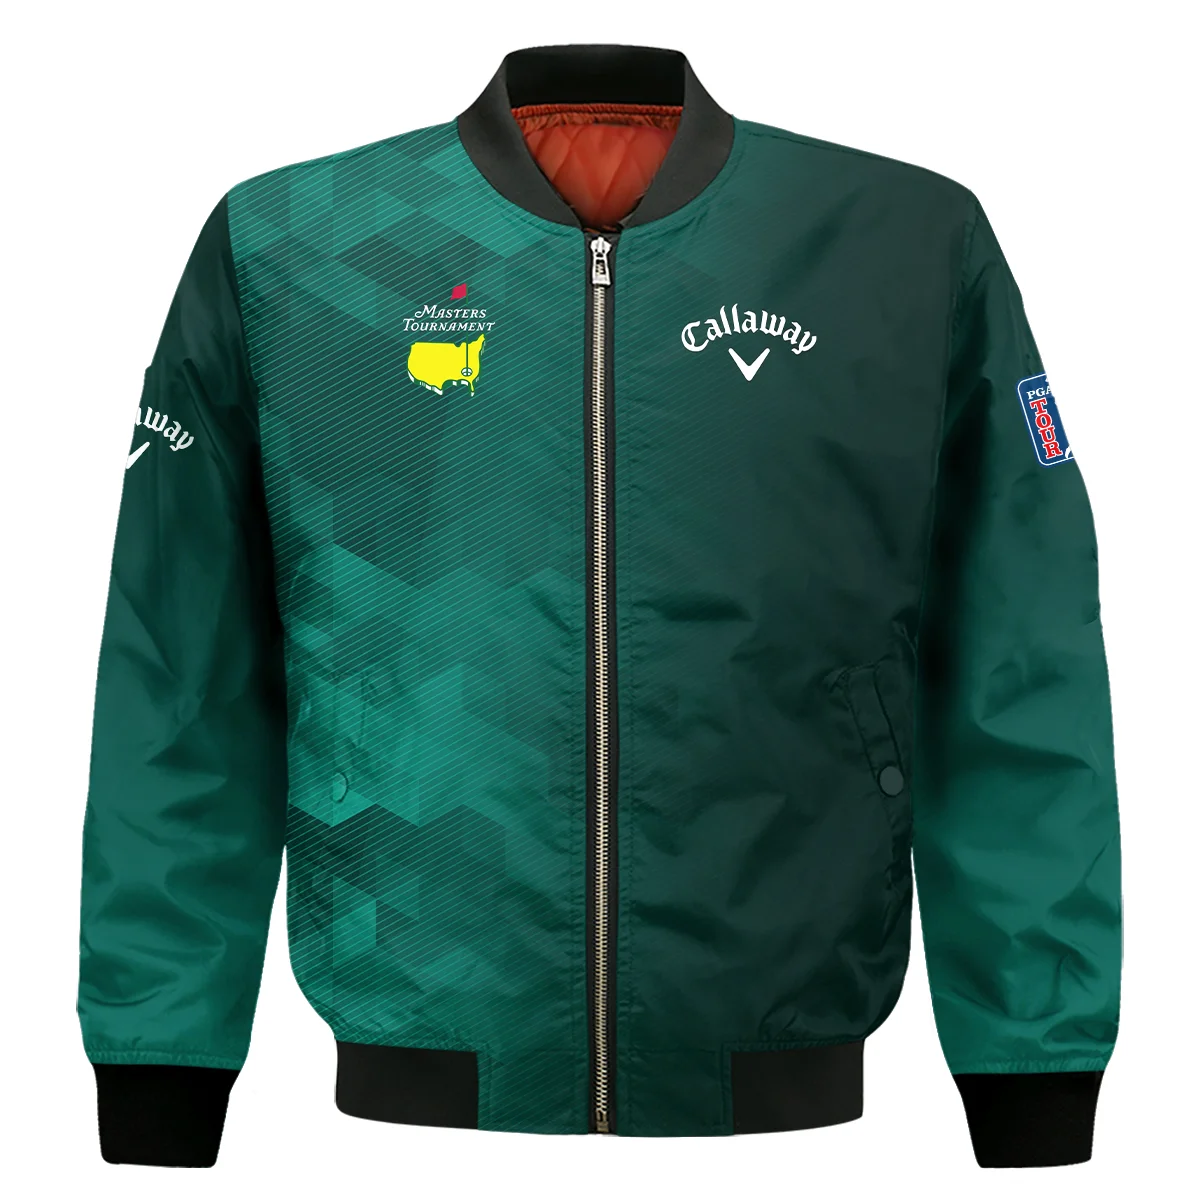 Callaway Golf Sport Dark Green Gradient Abstract Background Masters Tournament Bomber Jacket Style Classic Bomber Jacket